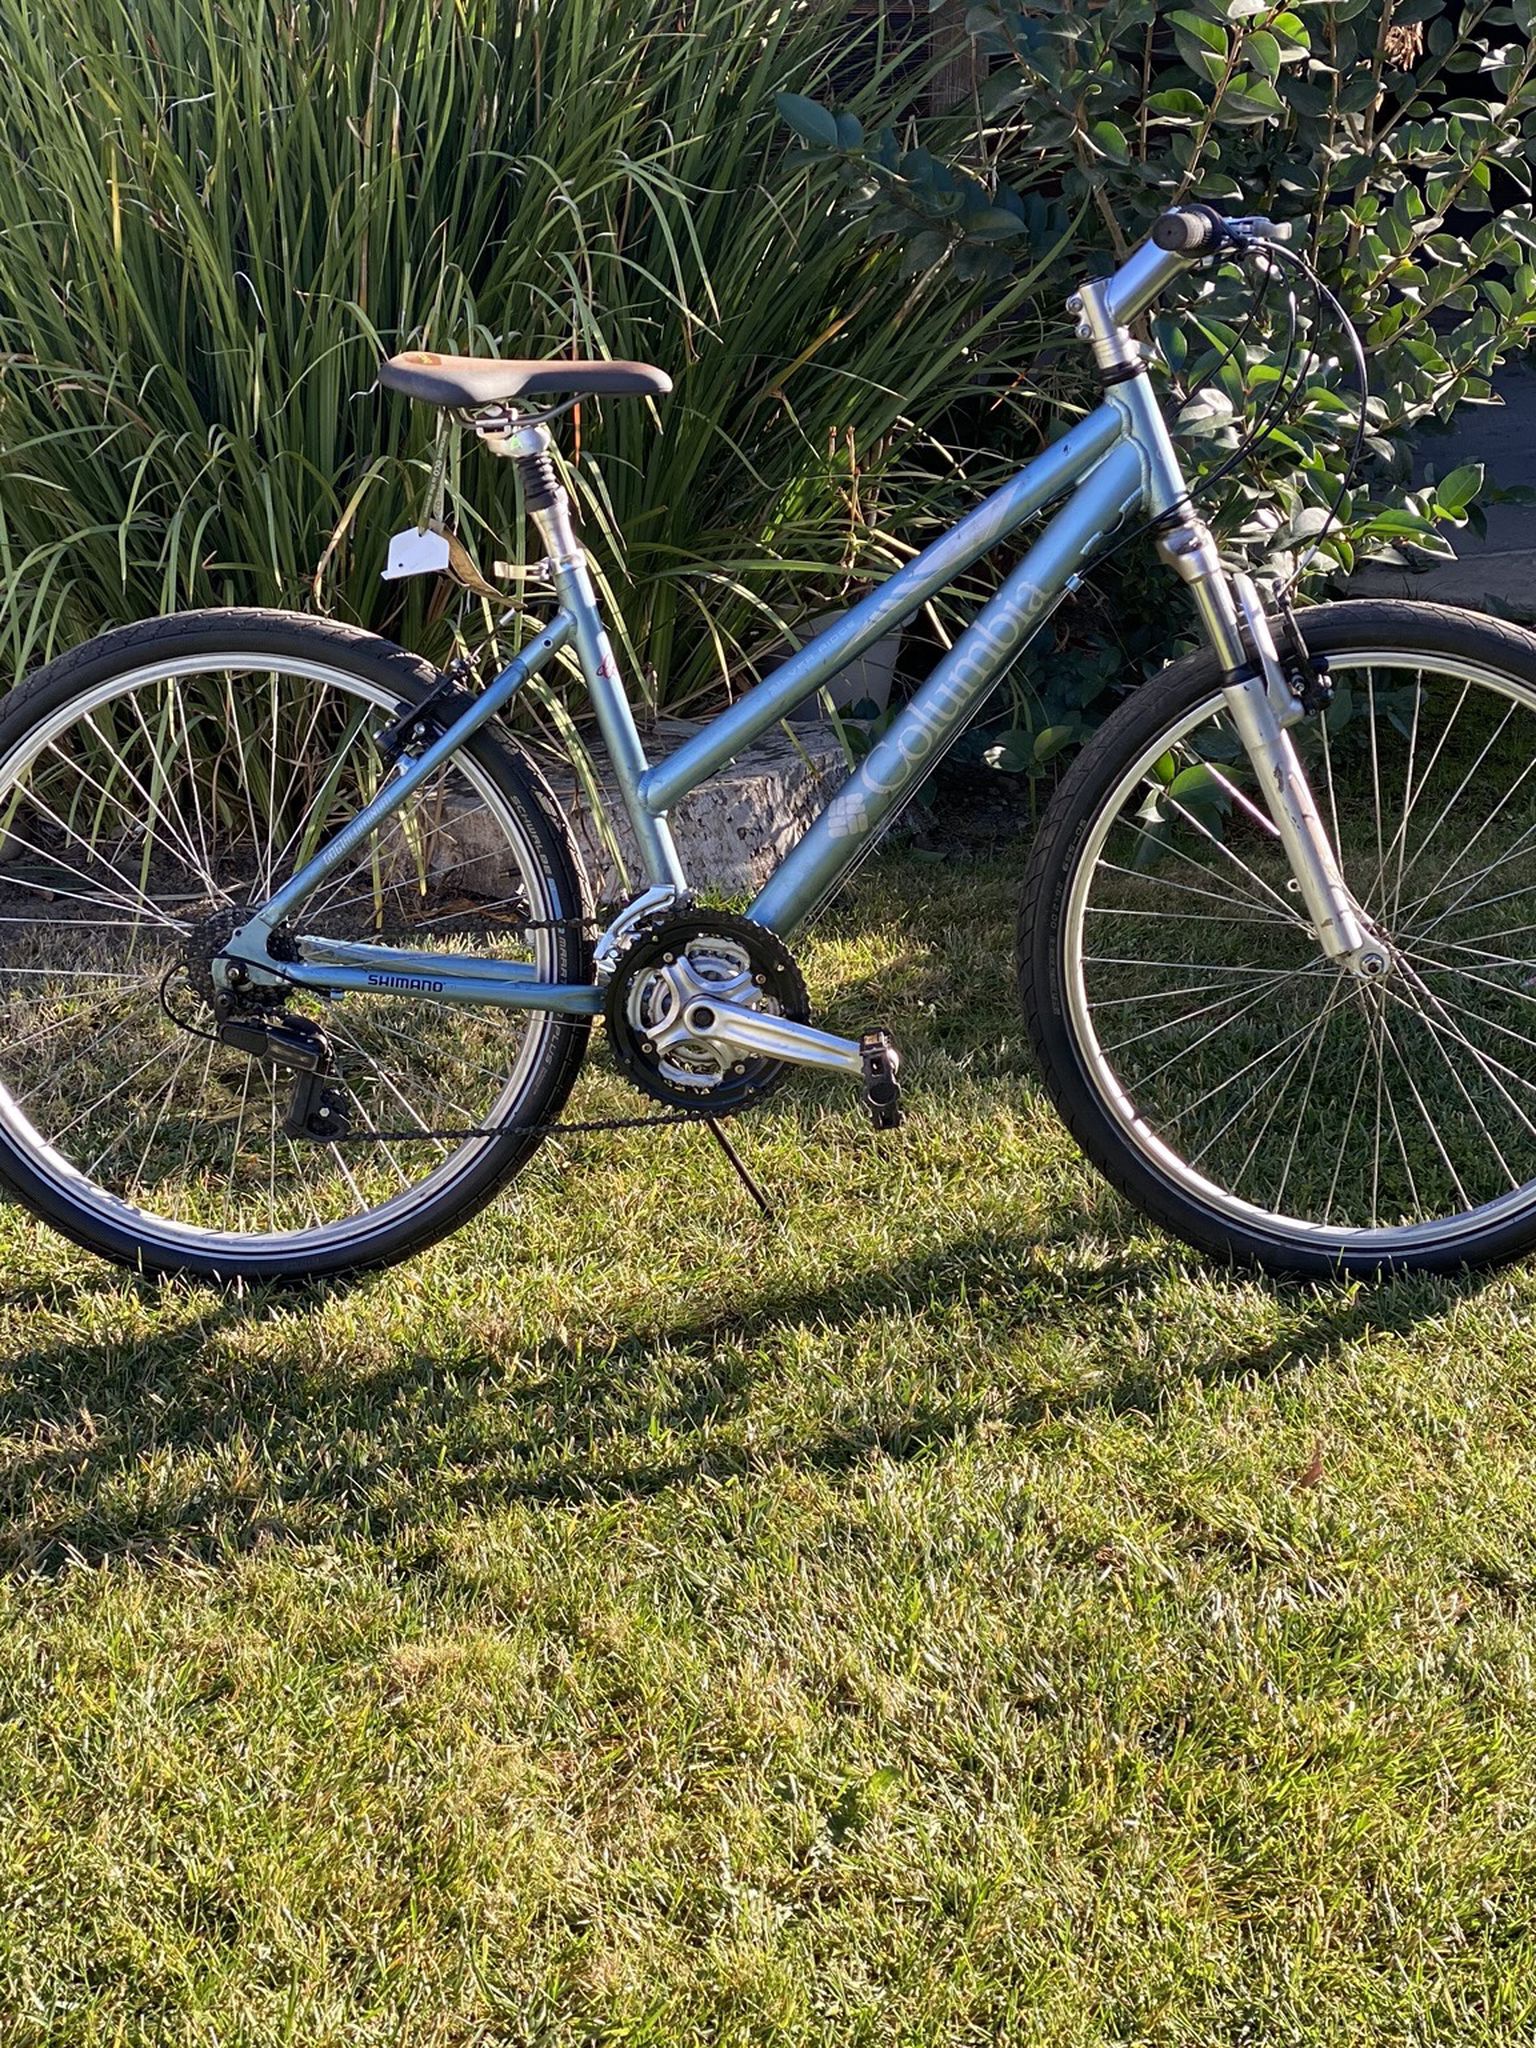 Huffy Mountain Bike Med Size everything works great tires 26